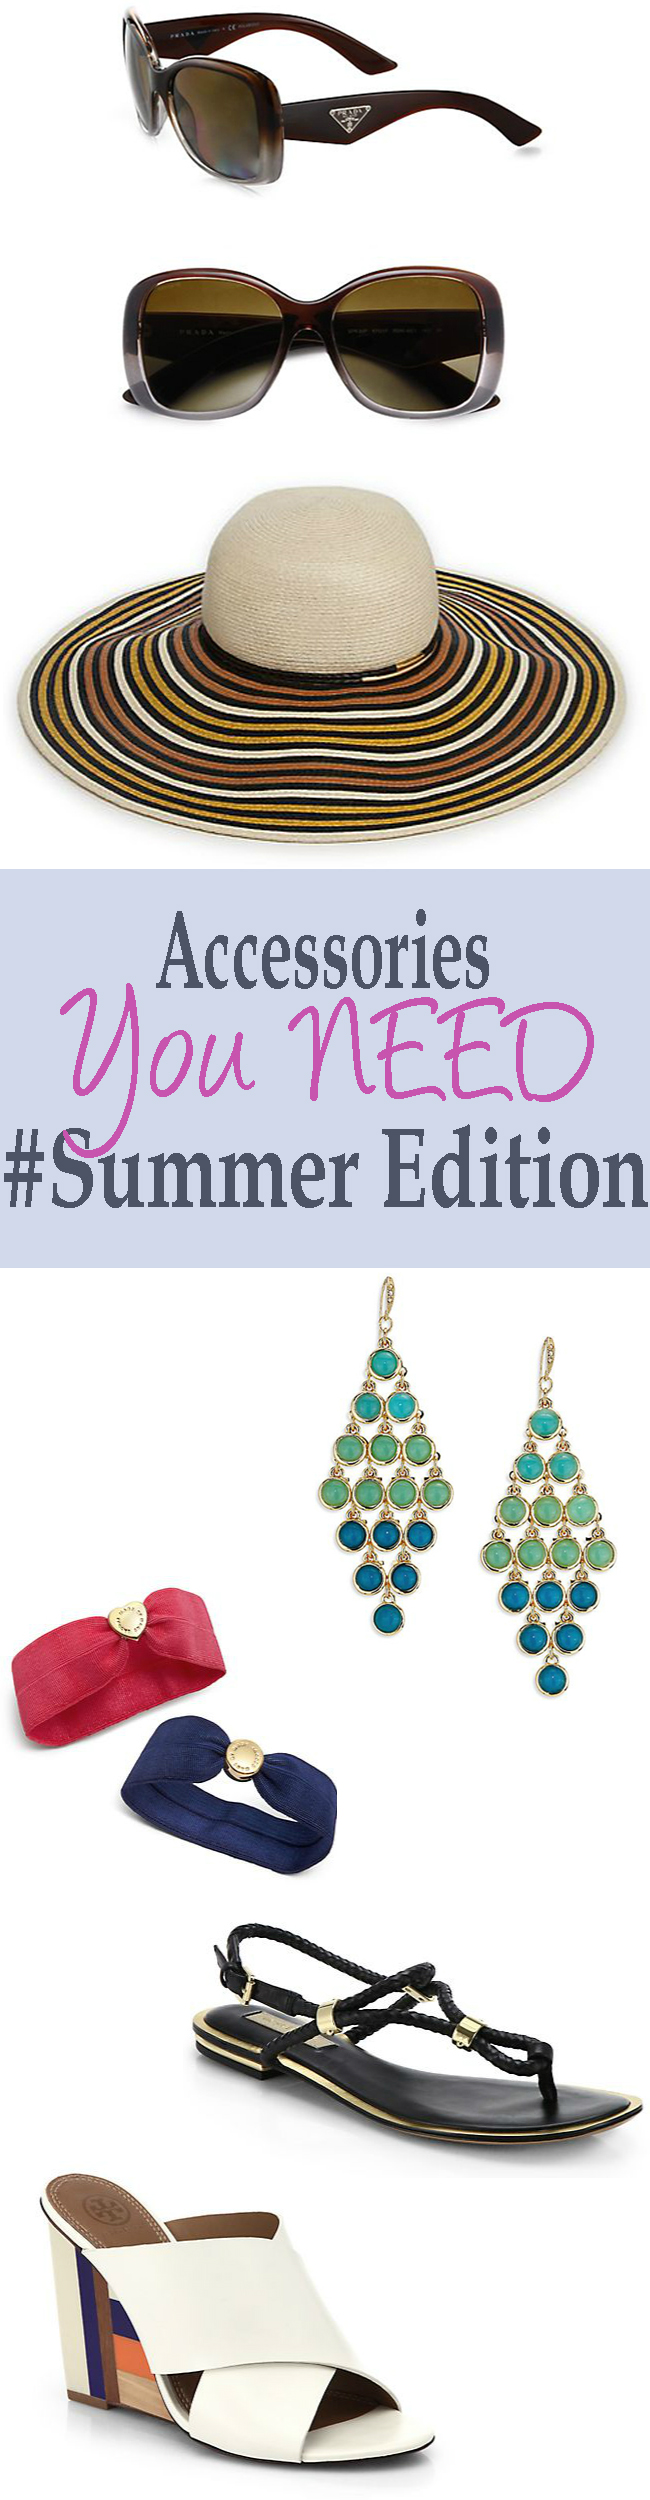 Accessories You NEED For Summer 2015